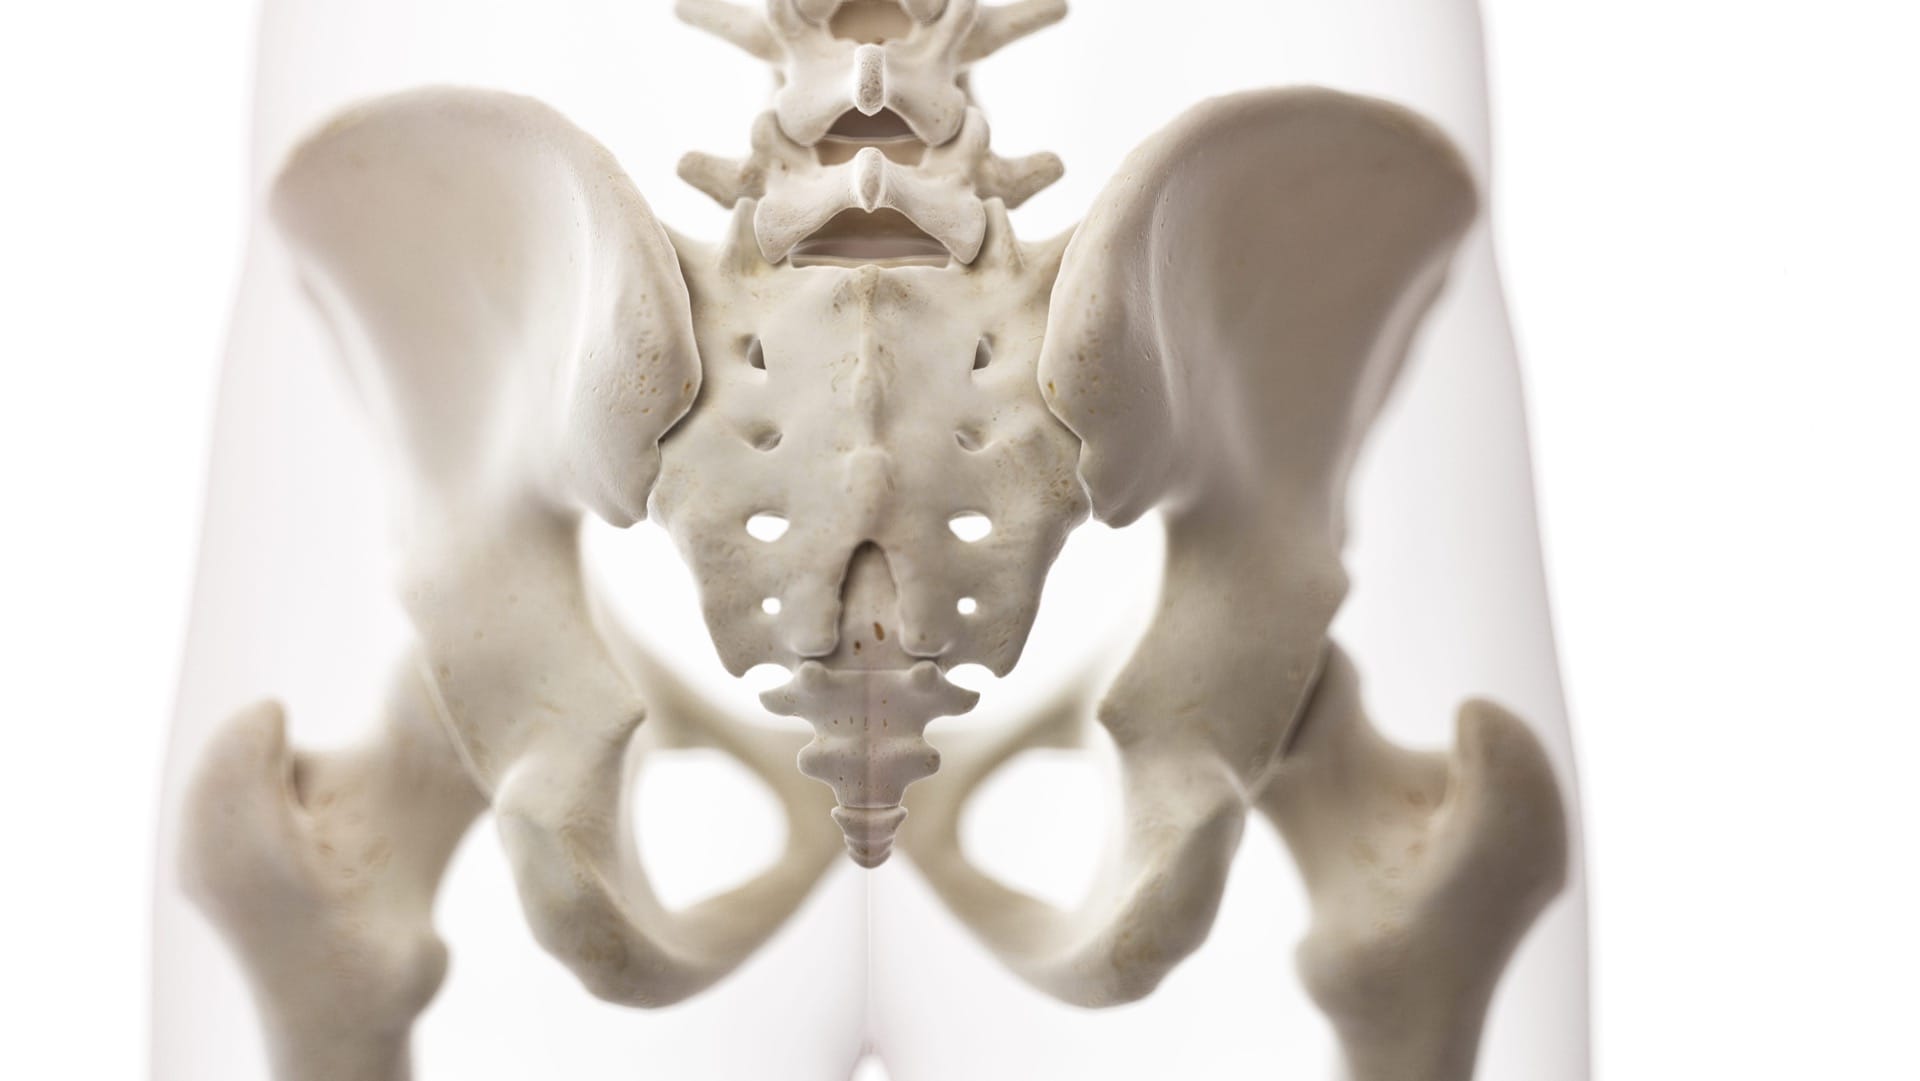 Sacroiliac Injections in Florida